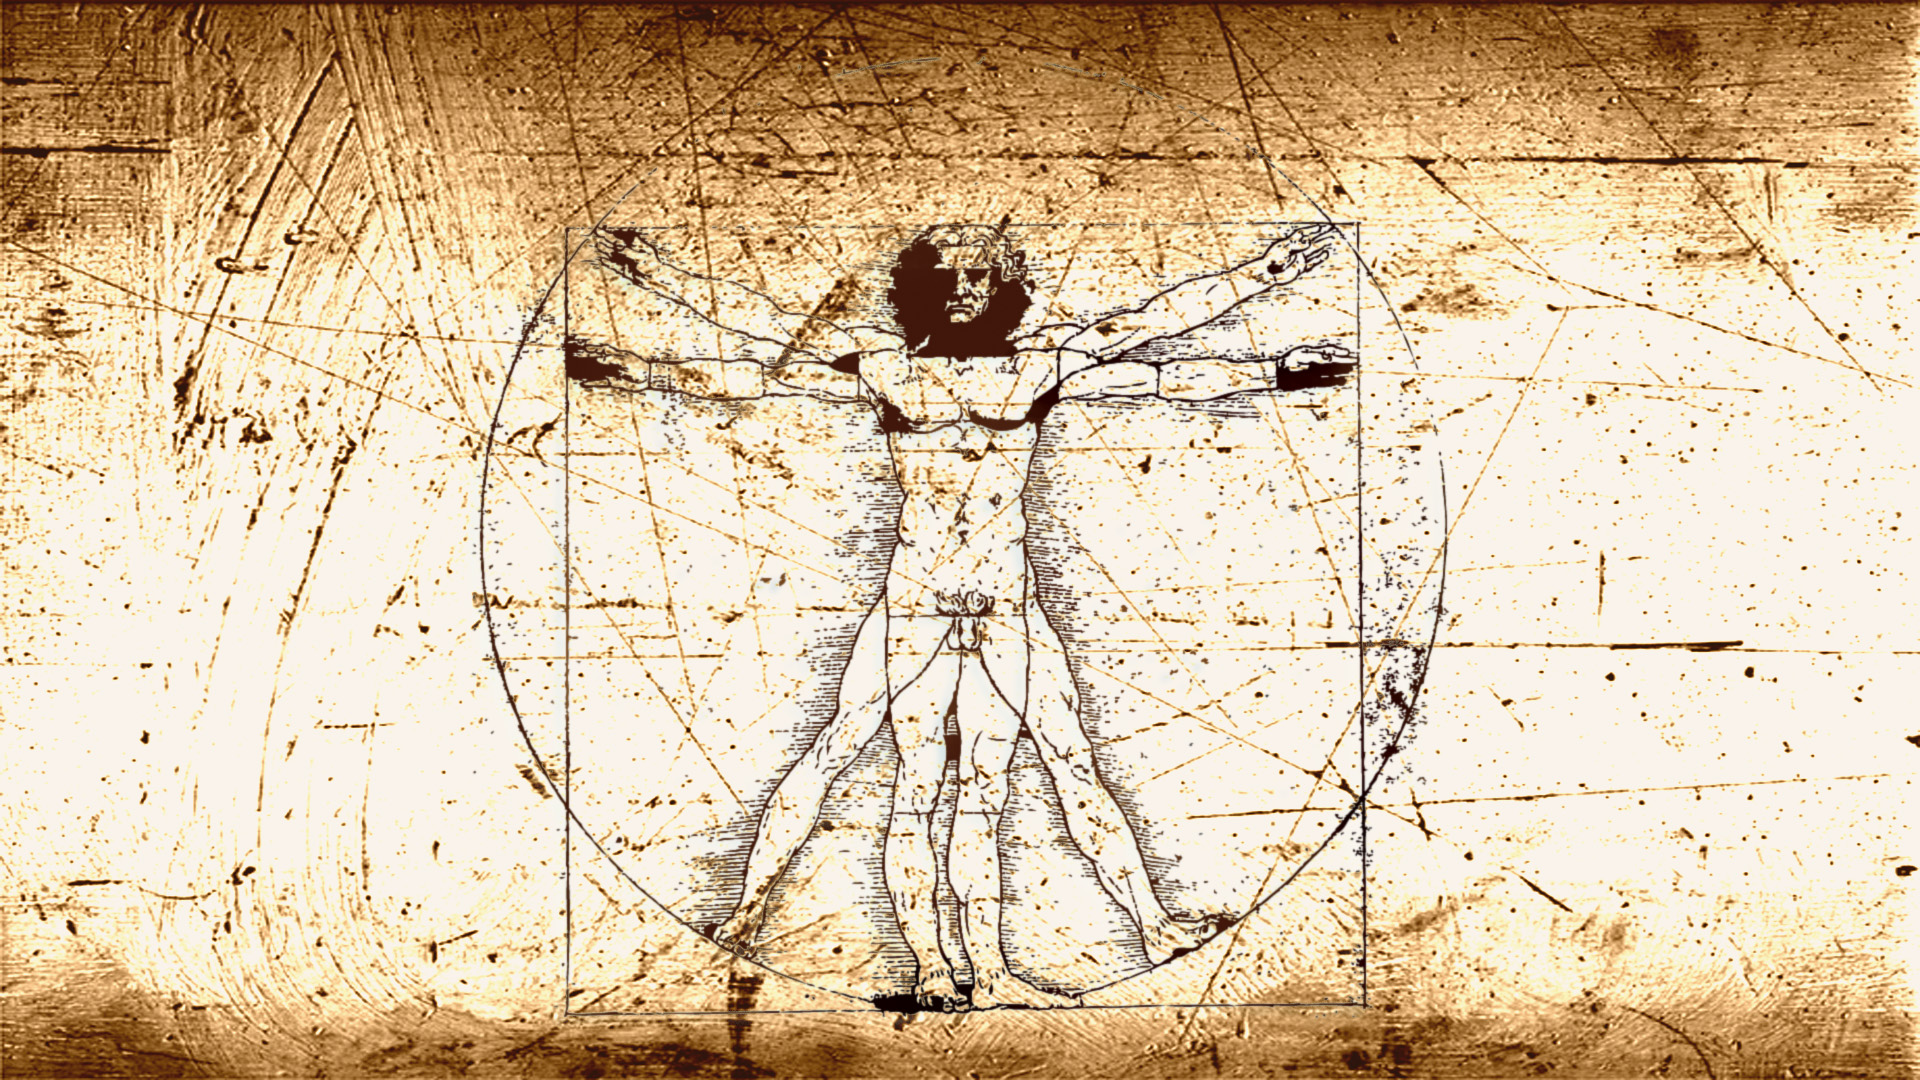 Da Vinci's "Vitruvian Man" is more about Body, than Mind and Spirit. But it's still what I think of in my head when I think about this stuff. Stop looking at his penis.